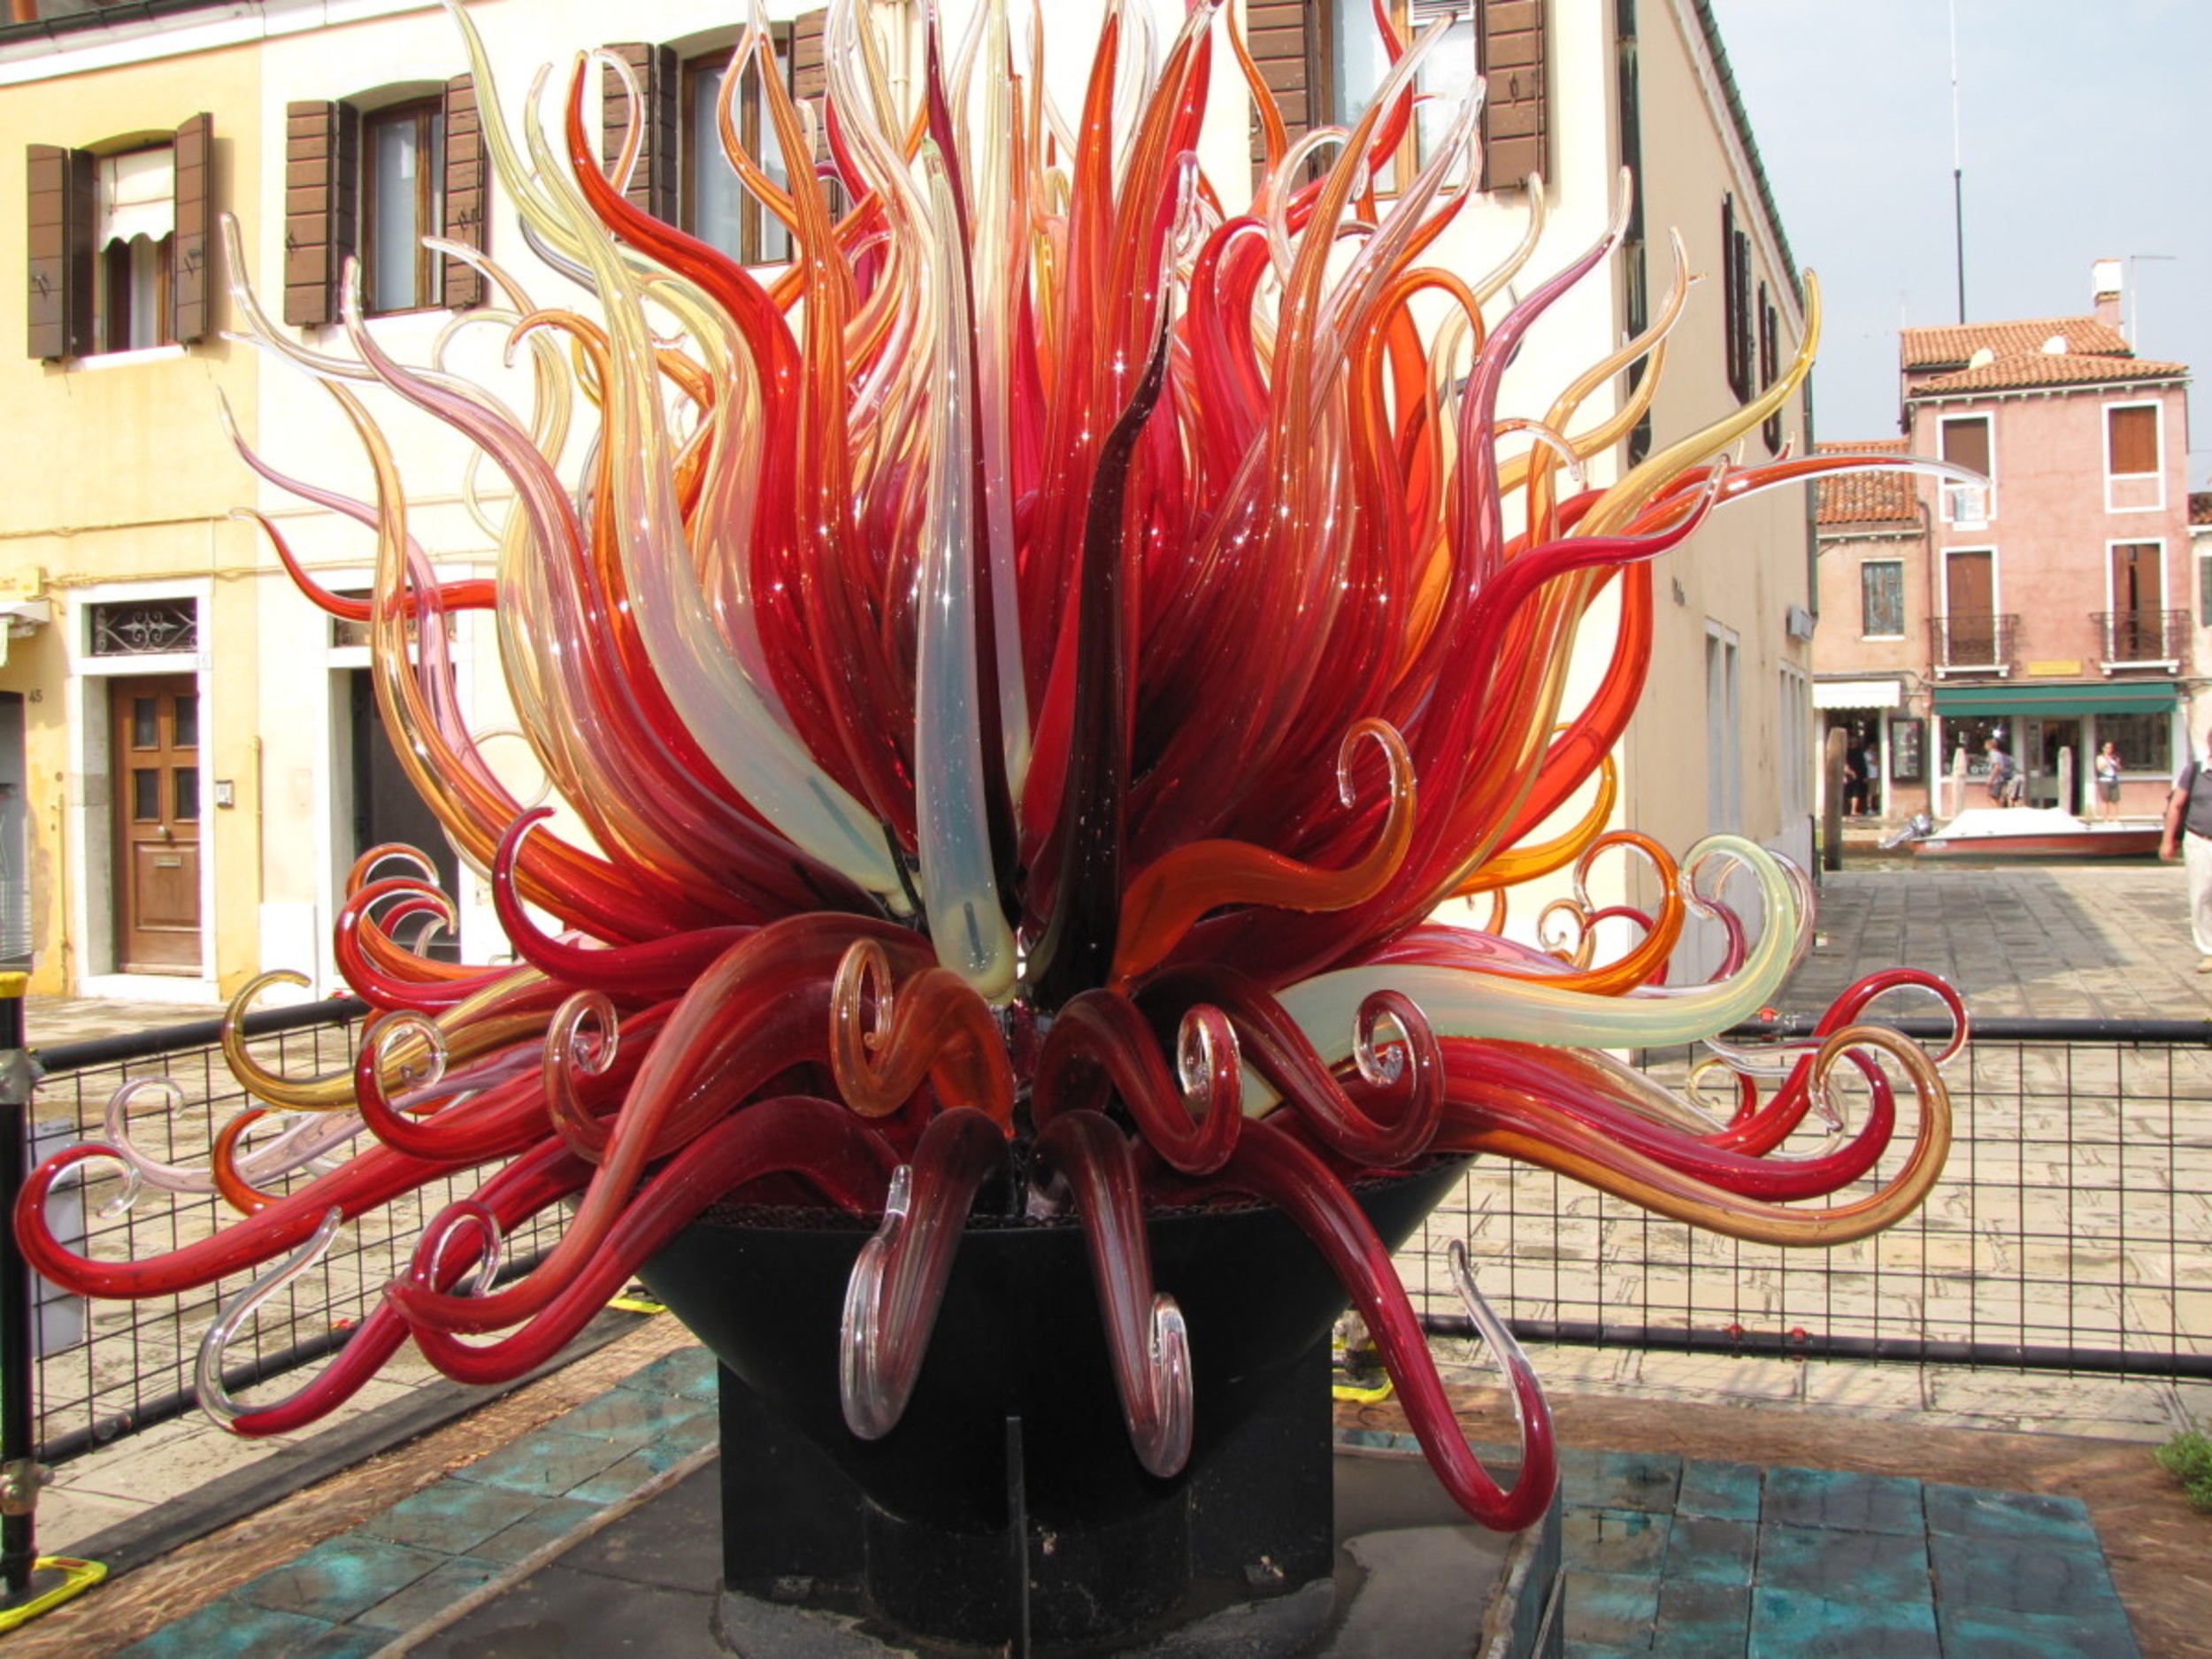 <p>While your hopping from island to island, make time for a trip to Murano and admire the glass-making artistry. The products are held on display at the Murano glass museum, where you're gonna want to keep an eye on your pocketbook. Not because of pickpockets, which are a problem in Venice. But because these dreamy works of art are going to inspire you to stop by the gift shop on your way out, or at a glass factory nearby. </p><p><a href='https://www.msn.com/en-us/community/channel/vid-cj9pqbr0vn9in2b6ddcd8sfgpfq6x6utp44fssrv6mc2gtybw0us'>Follow us on MSN to see more of our exclusive lifestyle content.</a></p>